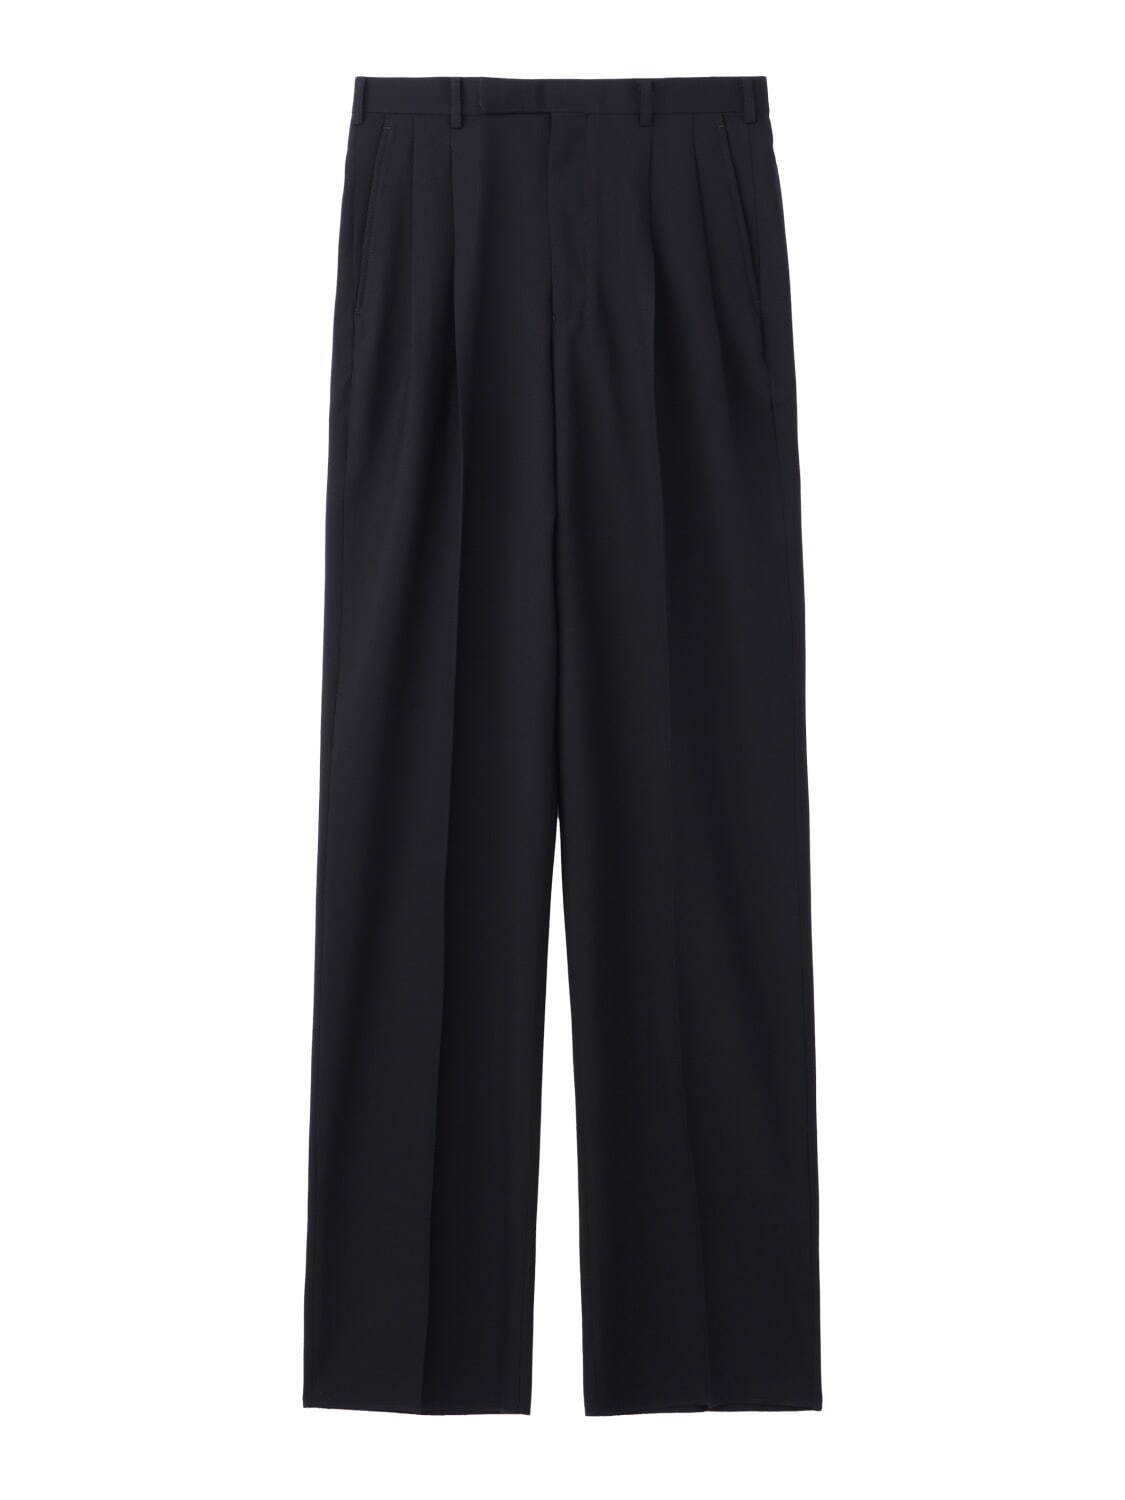 PLEATED TROUSERS 57,200円